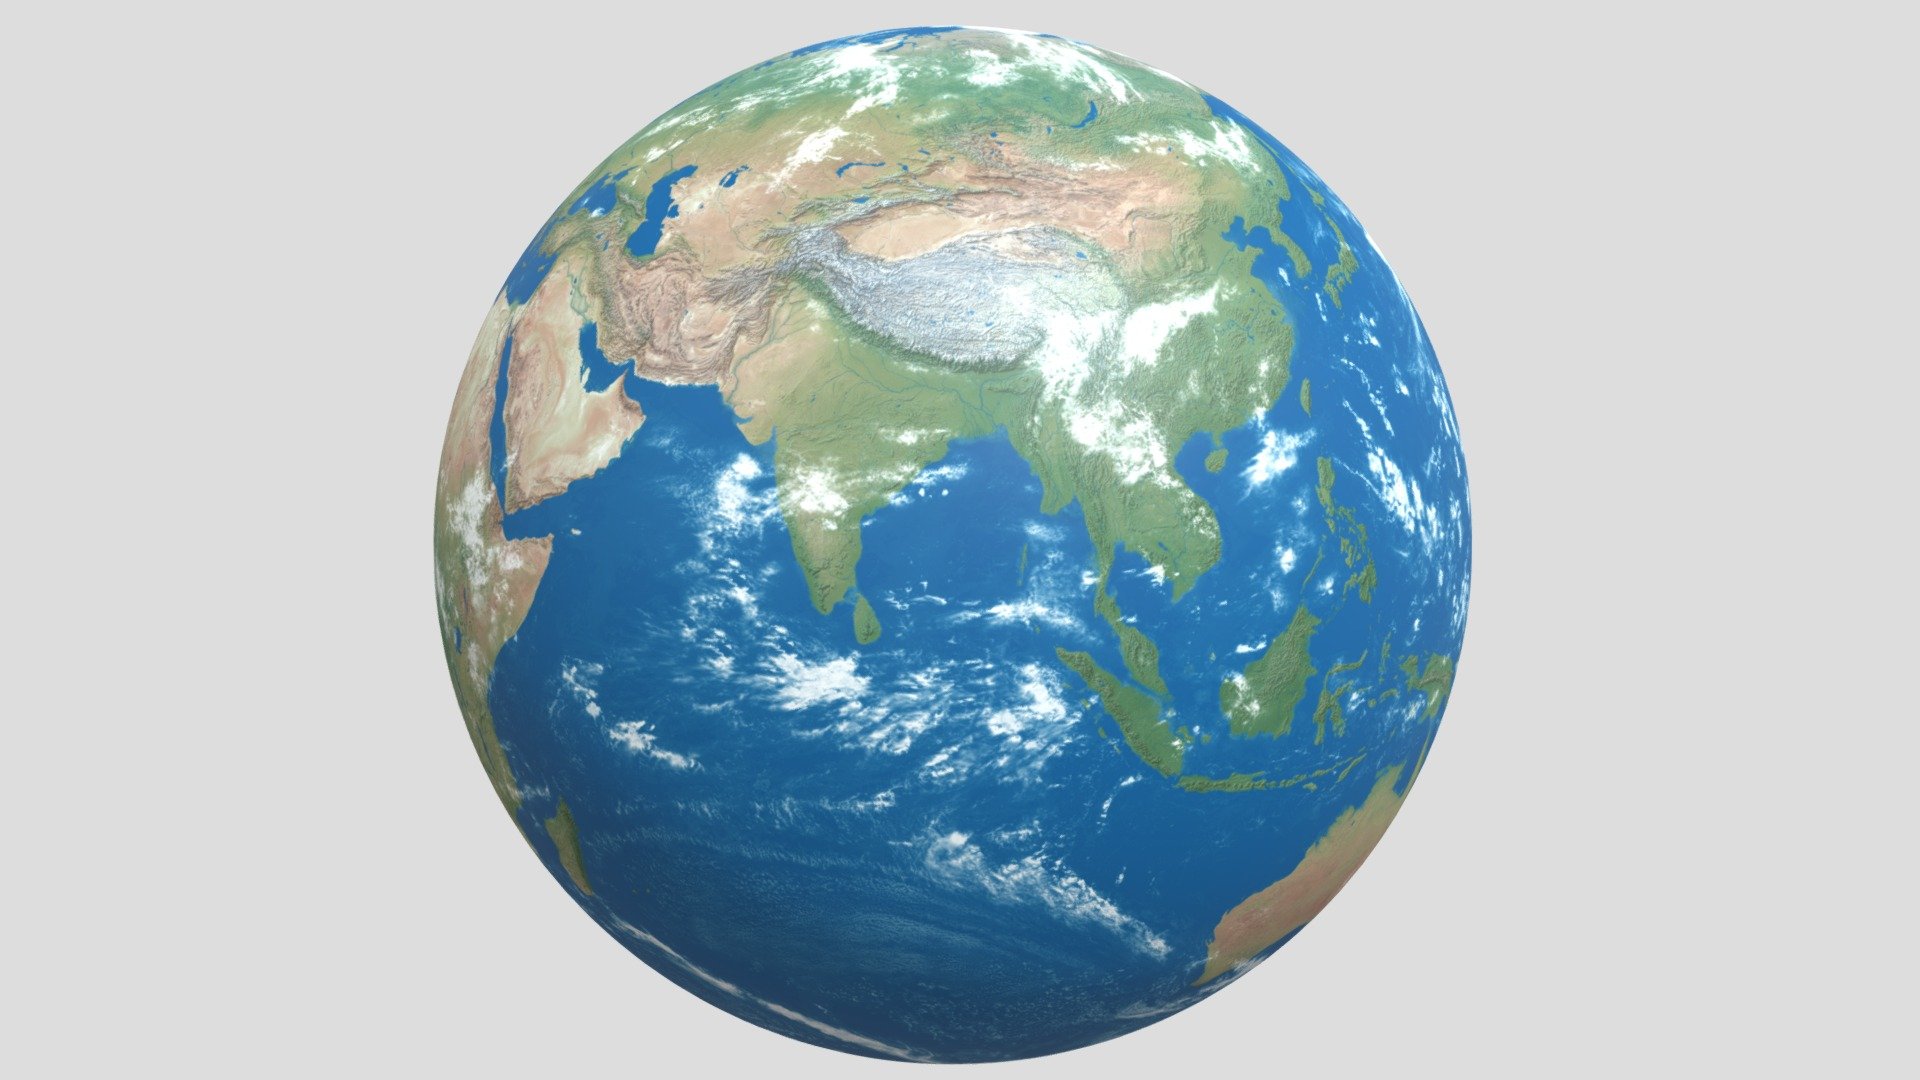 -8K HD Planet Earth.

-This product contains 1 model.

-This product was created in Blender 2.8.

-Total vertices: 8,070 Total polygons: 8,193.

-Formats: . blend . fbx . obj, c4d,dae,fbx.

-Texture resolutions:

-earth_8k.jpg - 8192*4096.

-We hope you enjoy this model.

-Thank you 3d model